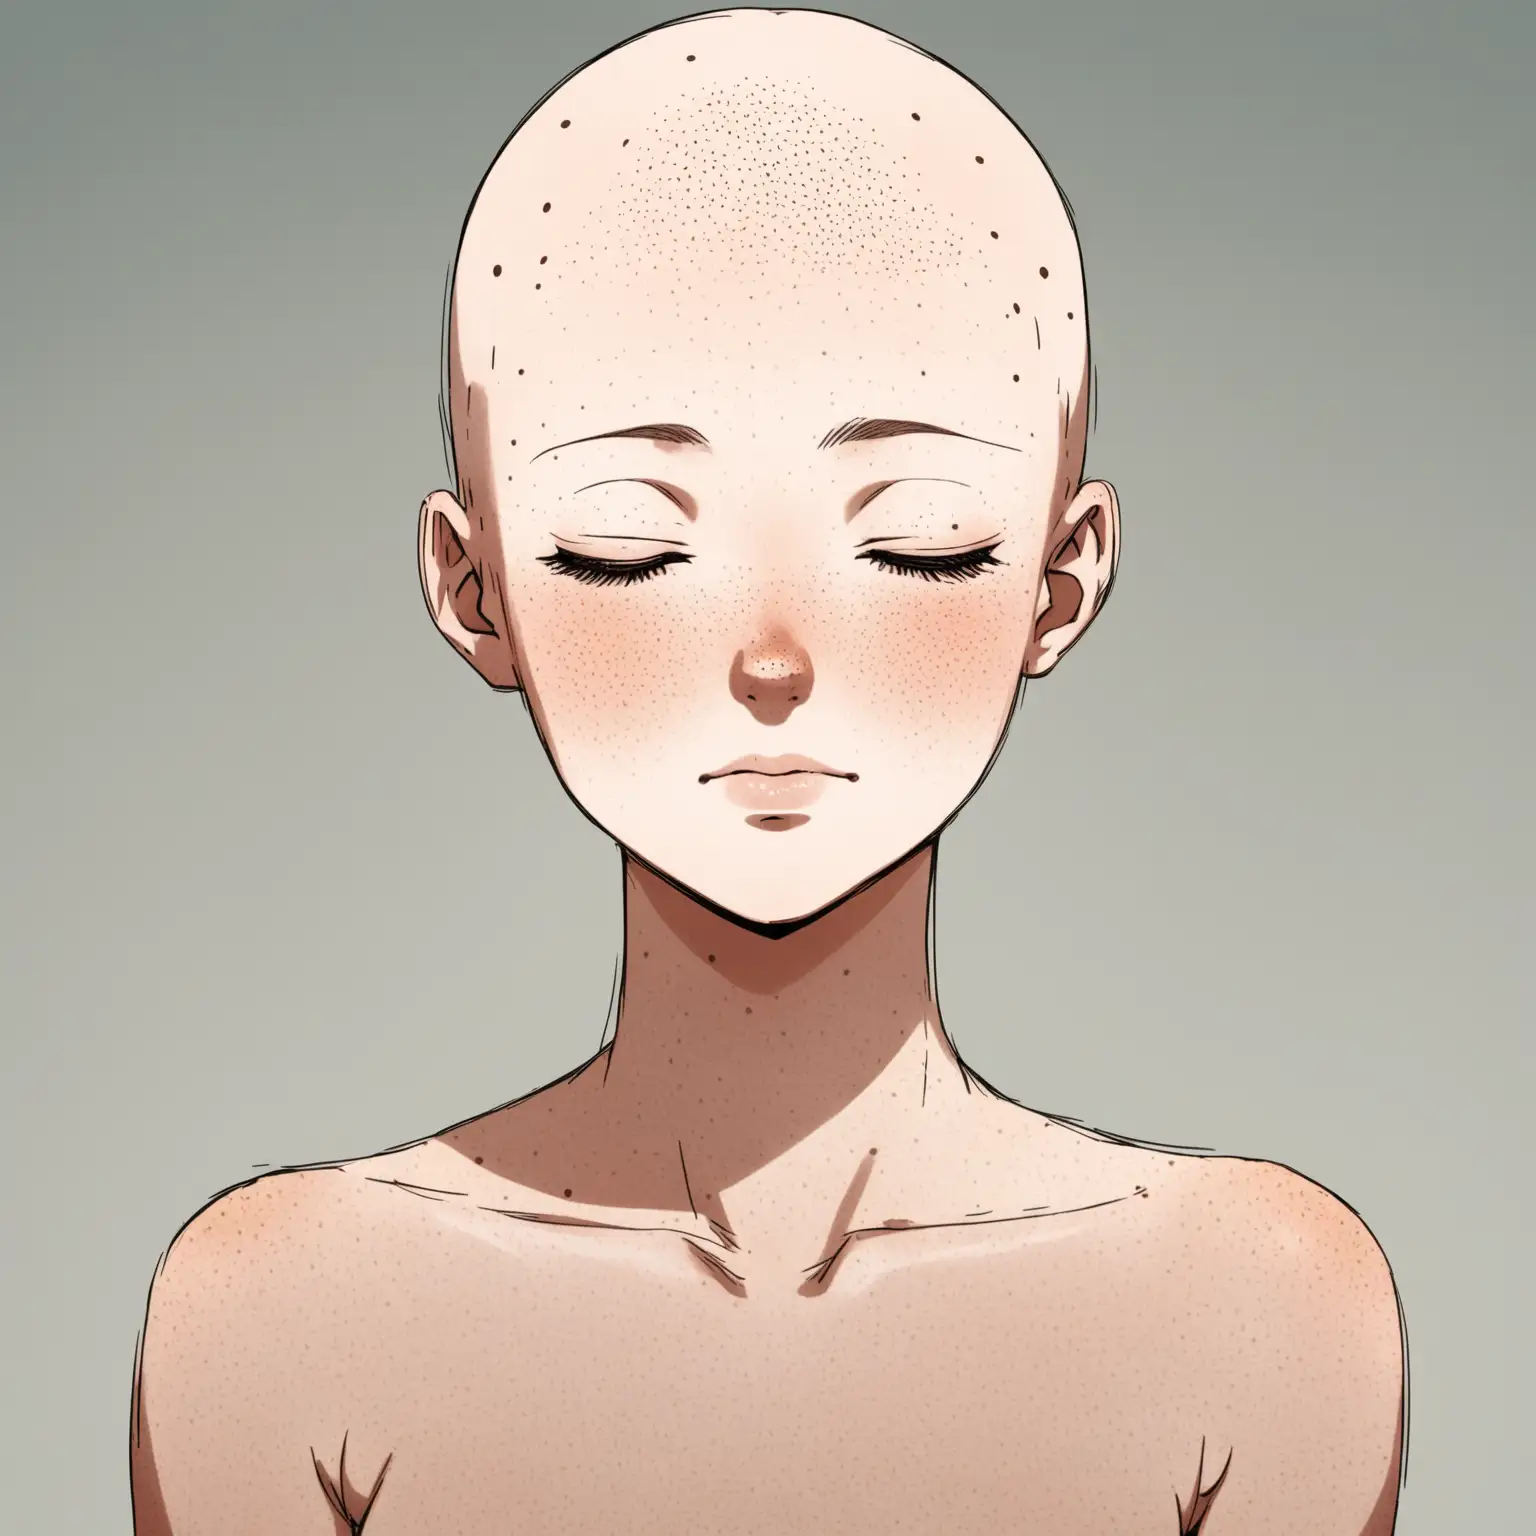 Beautiful bald anime woman with closed eyes with freckles  just on her face front view 